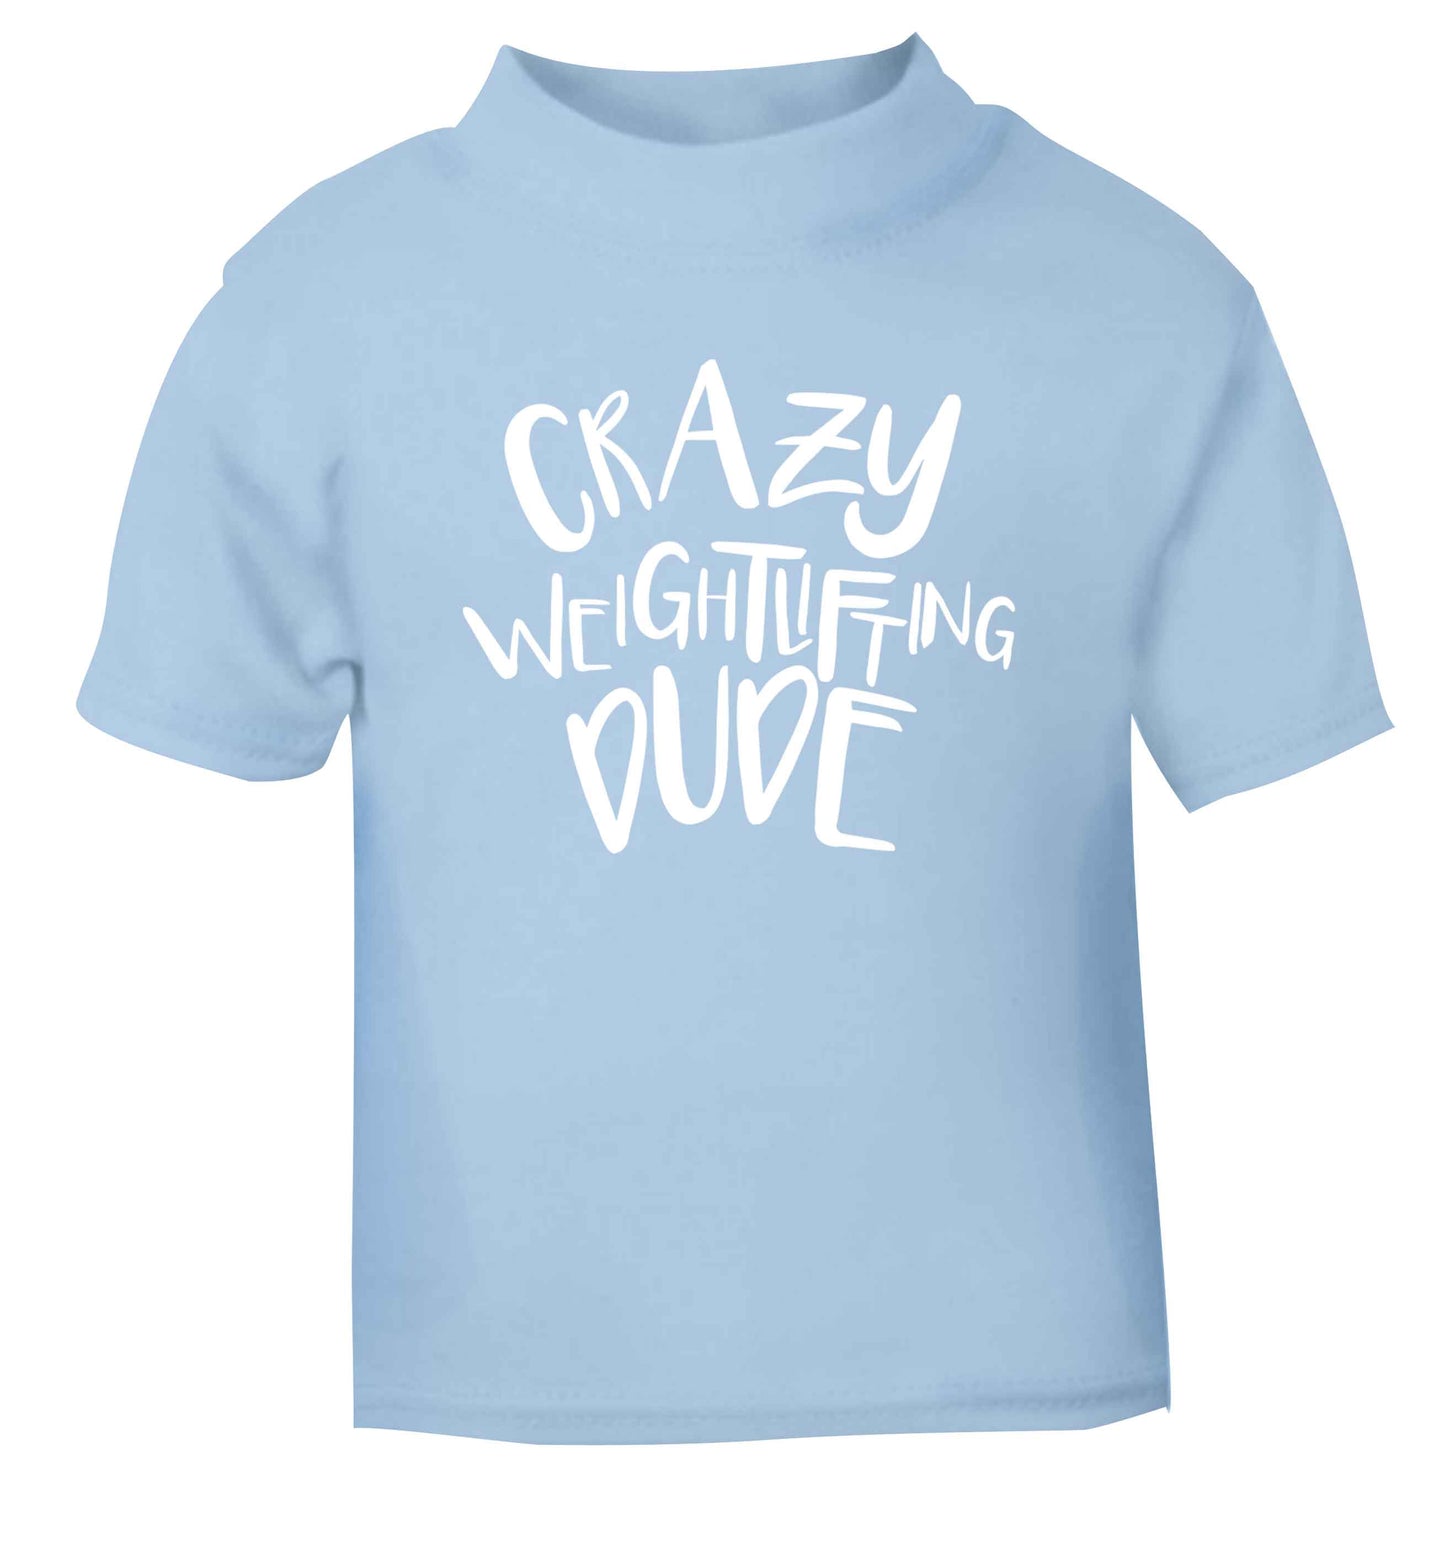 Crazy weightlifting dude light blue Baby Toddler Tshirt 2 Years